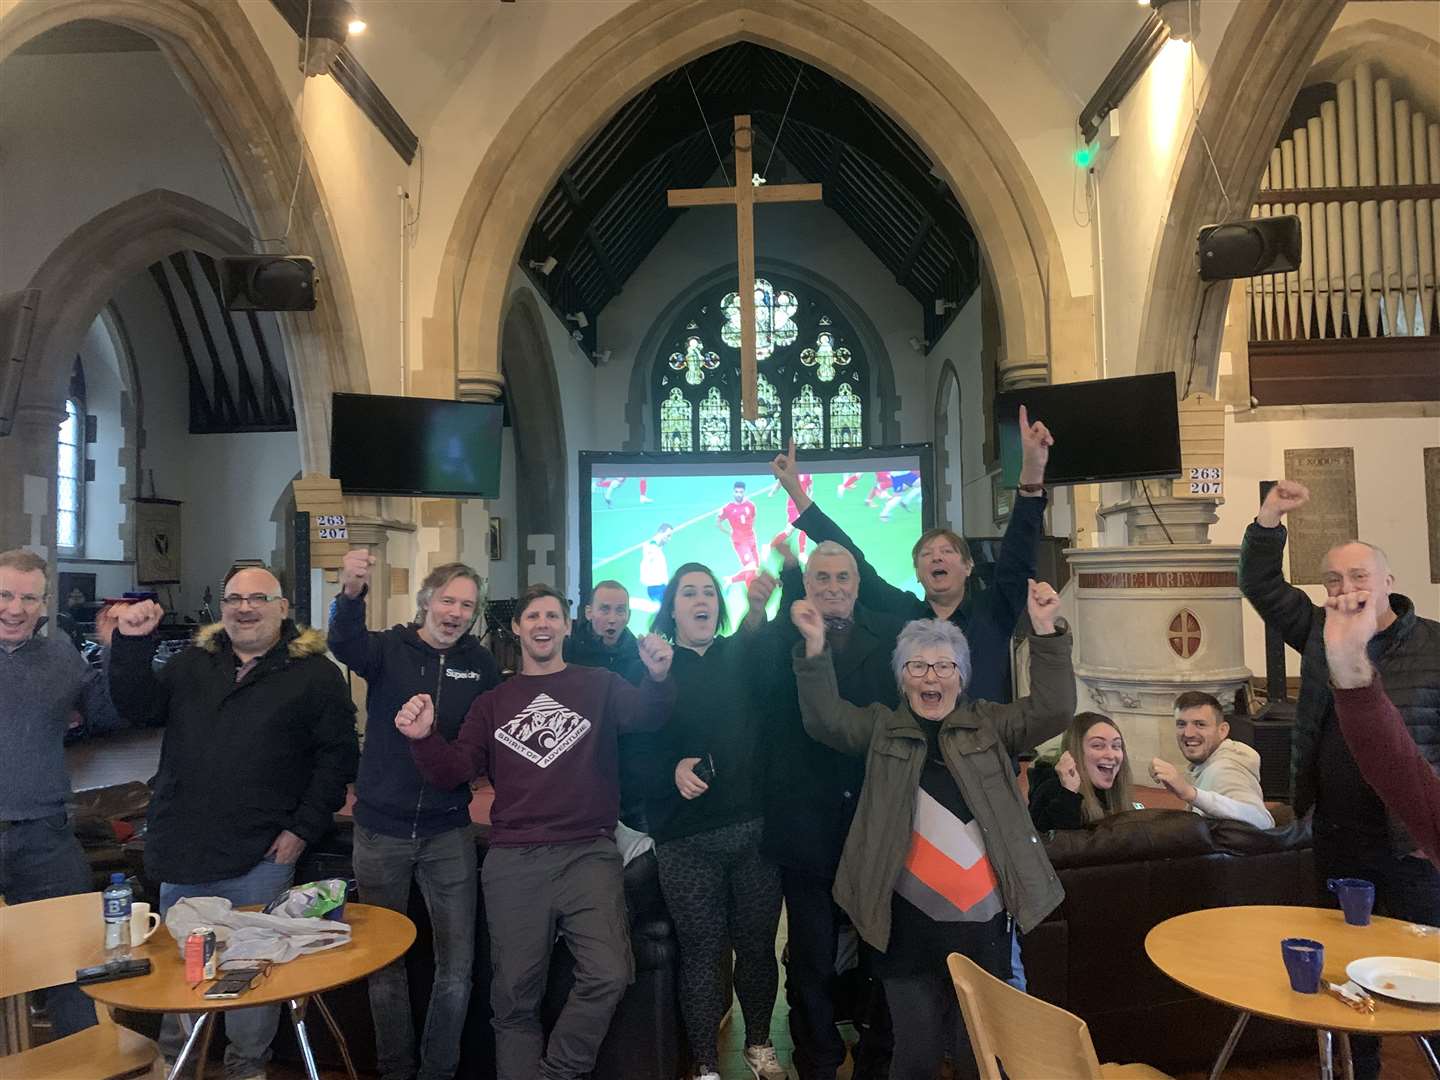 More than 25 people gathered to watch England's opening draw in the church